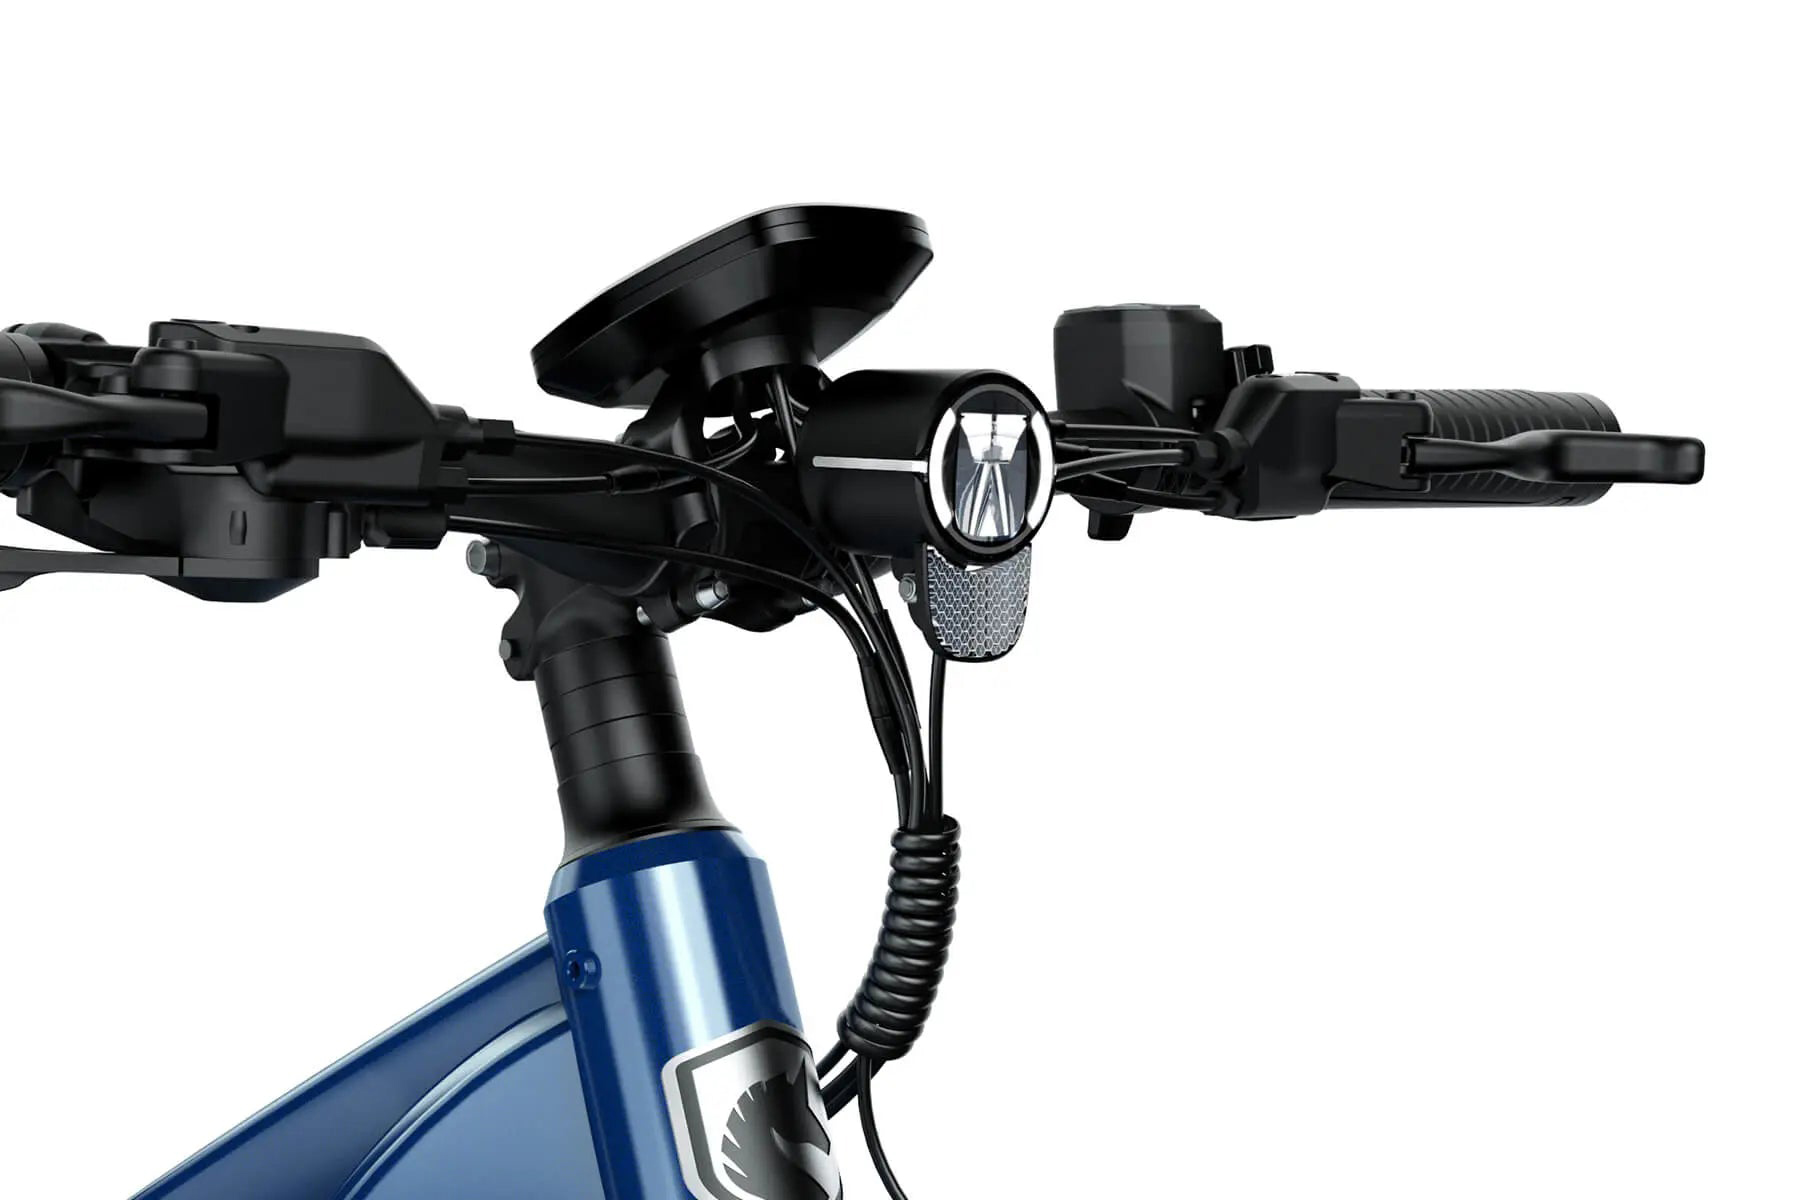 Hovsco includes an integrated front light on the HovRanger.